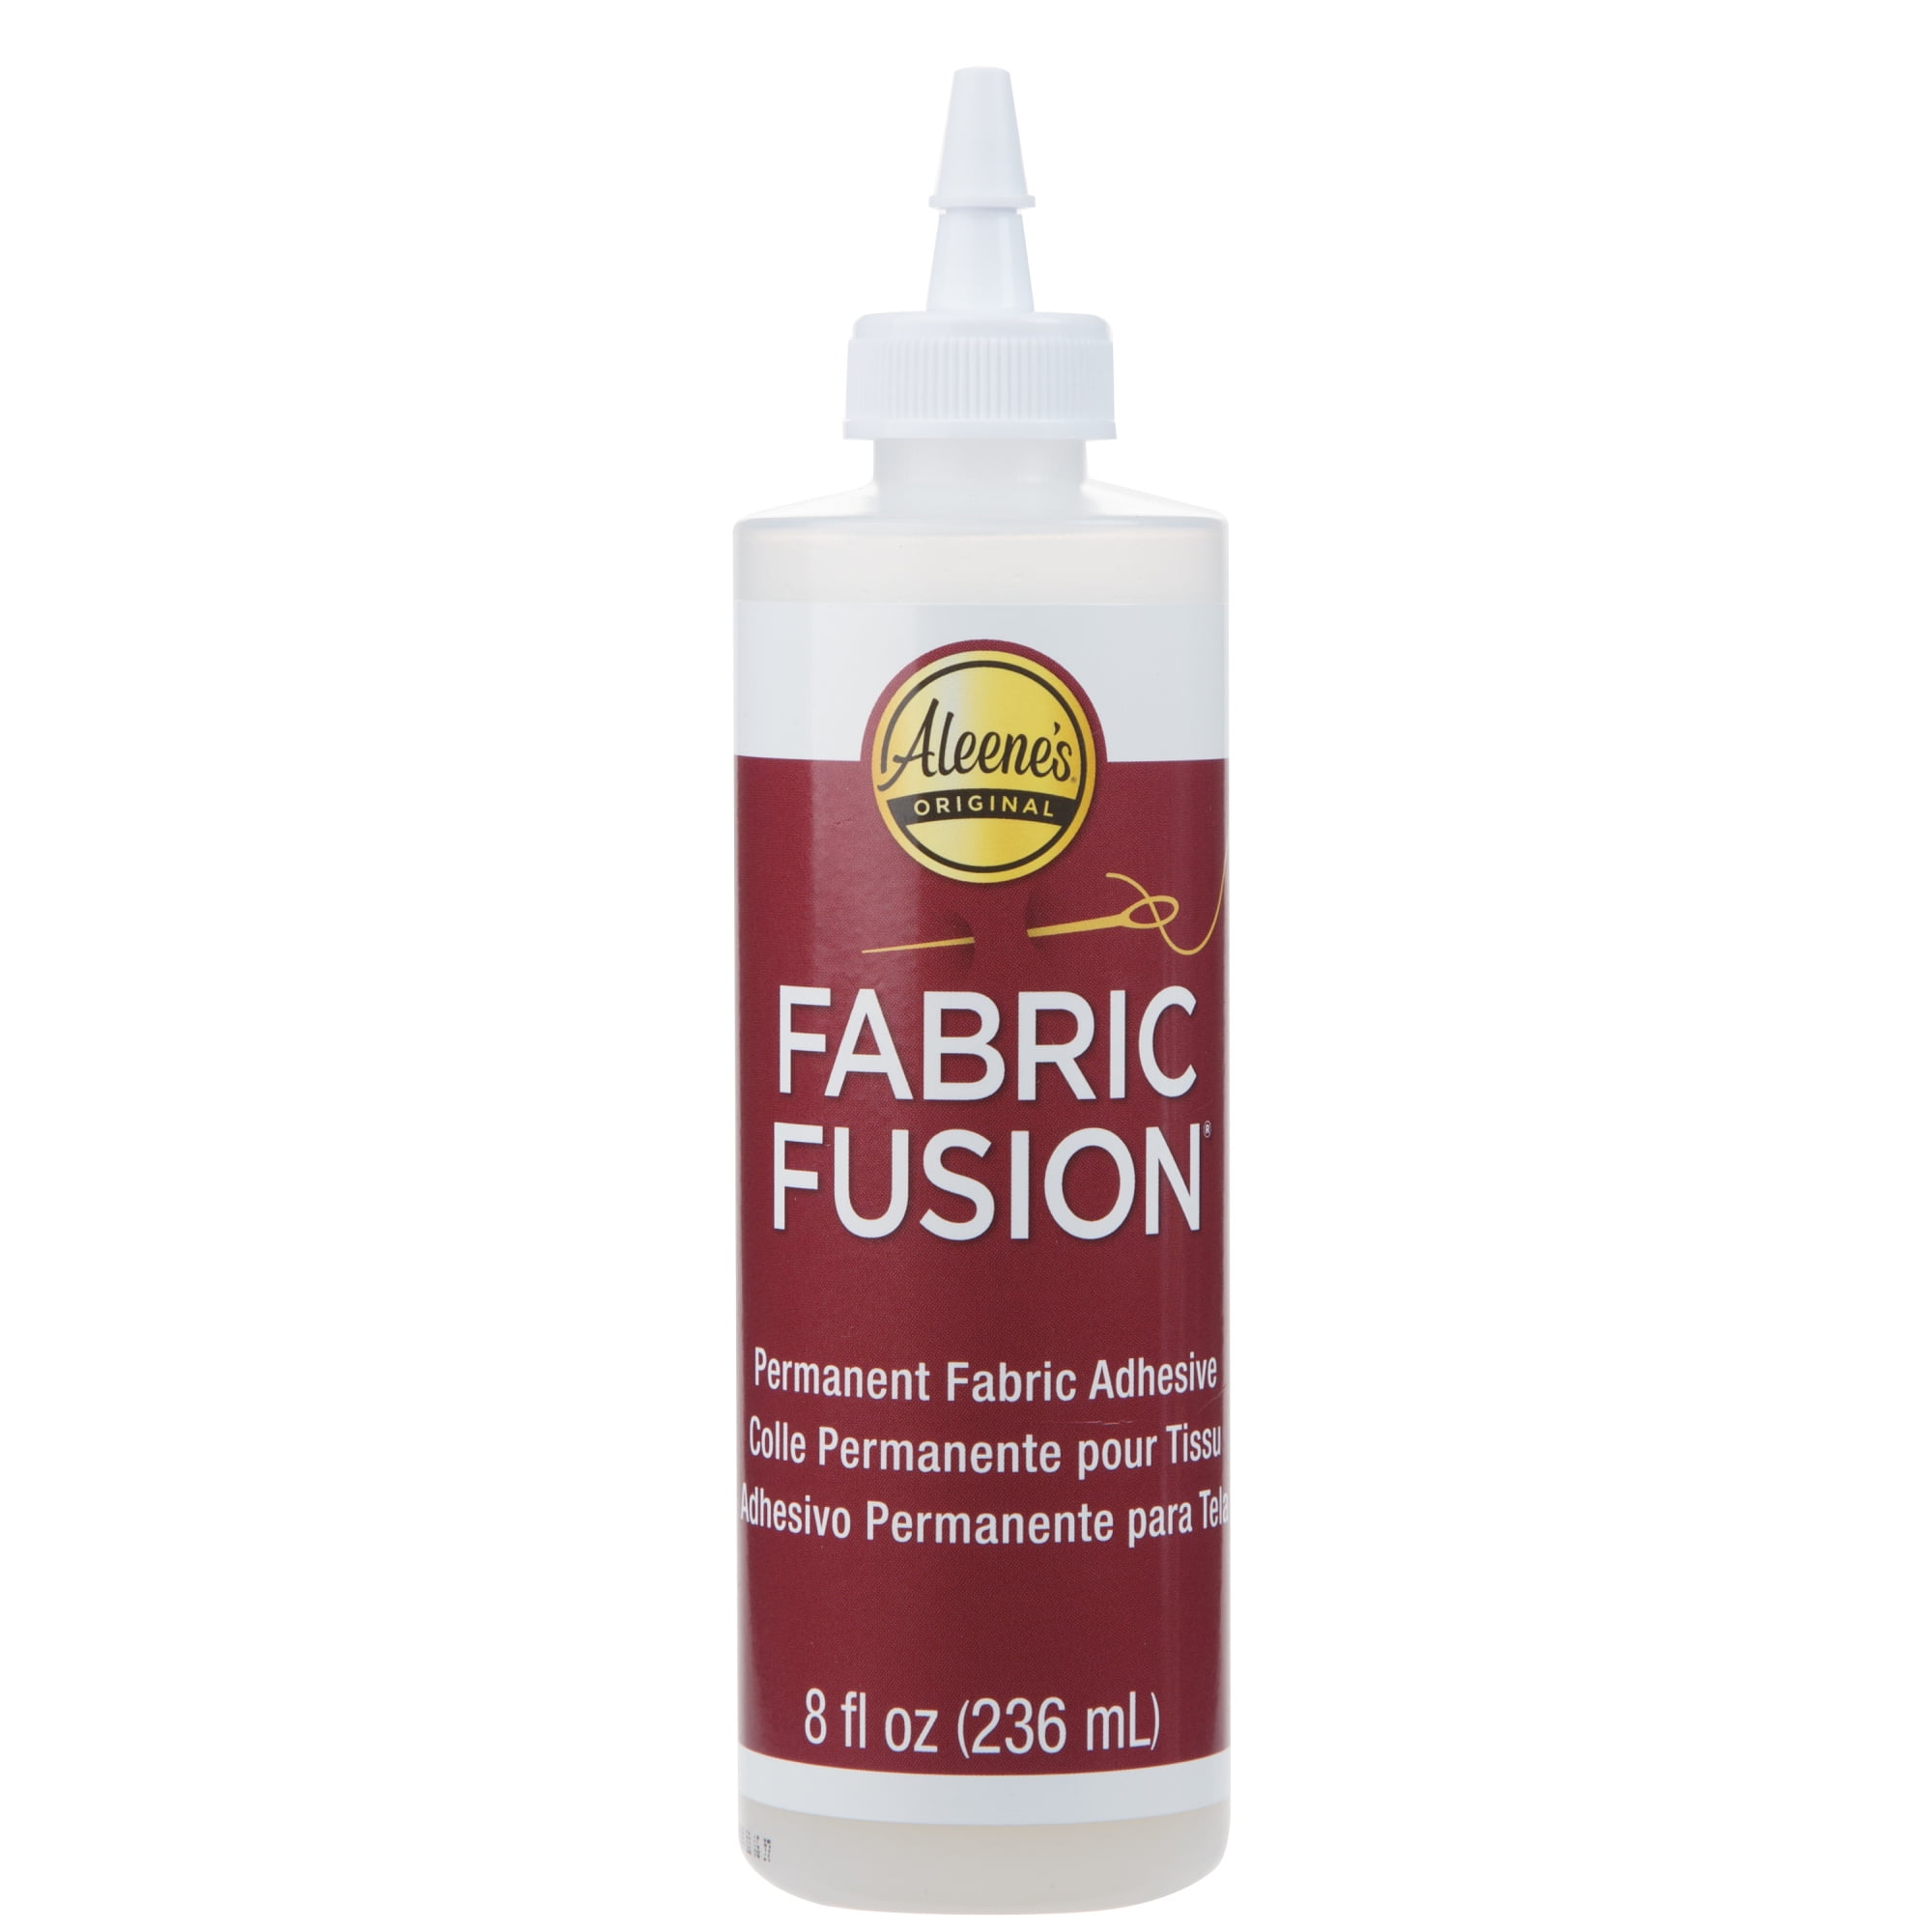 fabric glue for patches｜TikTok Search